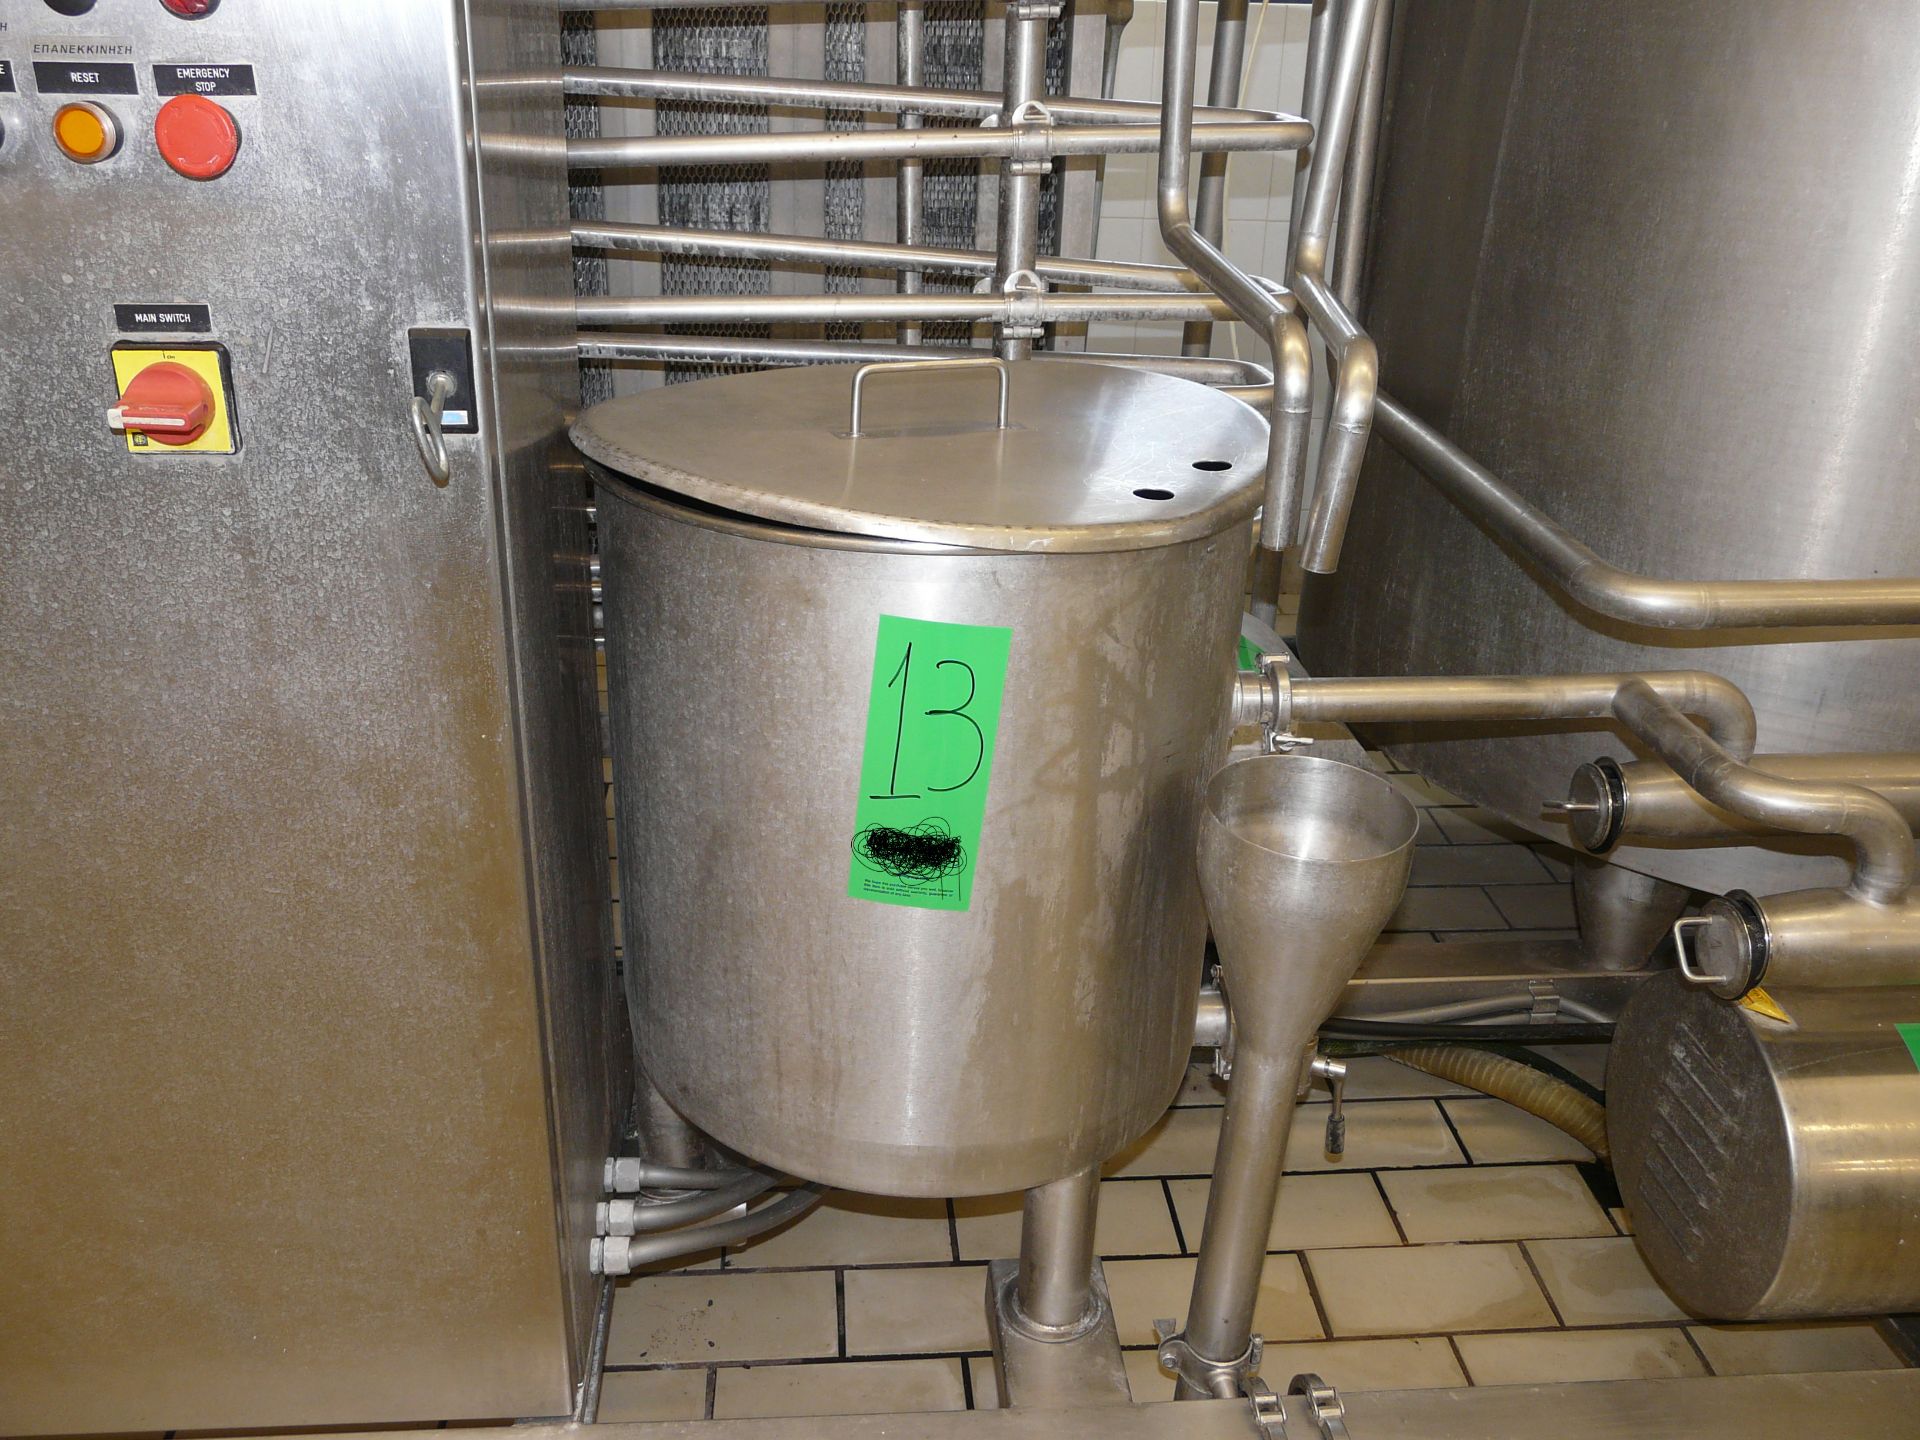 TETRA PAK HOYER HTST 1200 Pasteurizer for Ice Cream , Contains 2 x Tanks with agitators ,1 Plate - Image 15 of 20